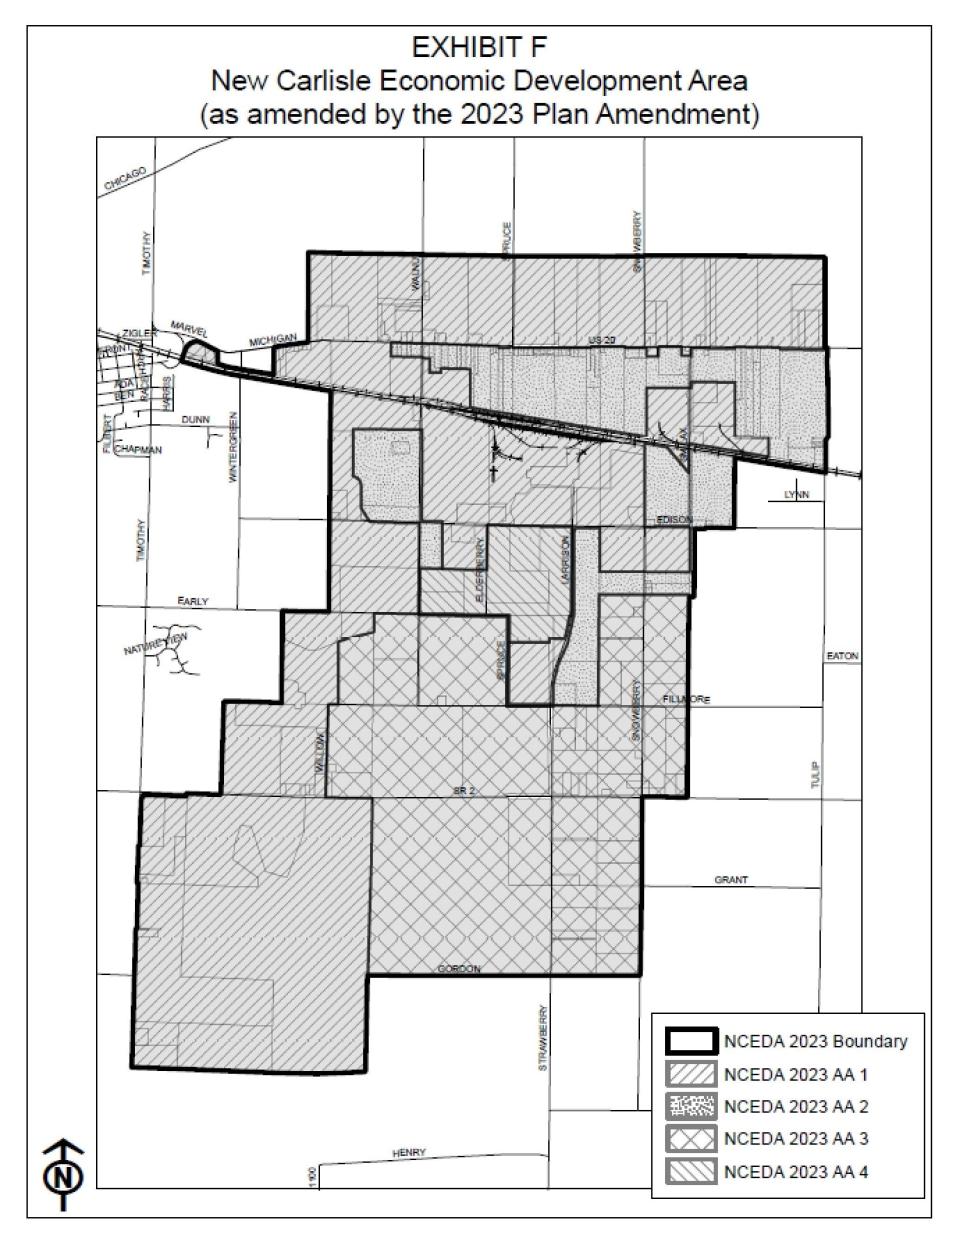 This map shows where existing New Carlisle Economic Development Area would see a proposed expansion in fall 2023.